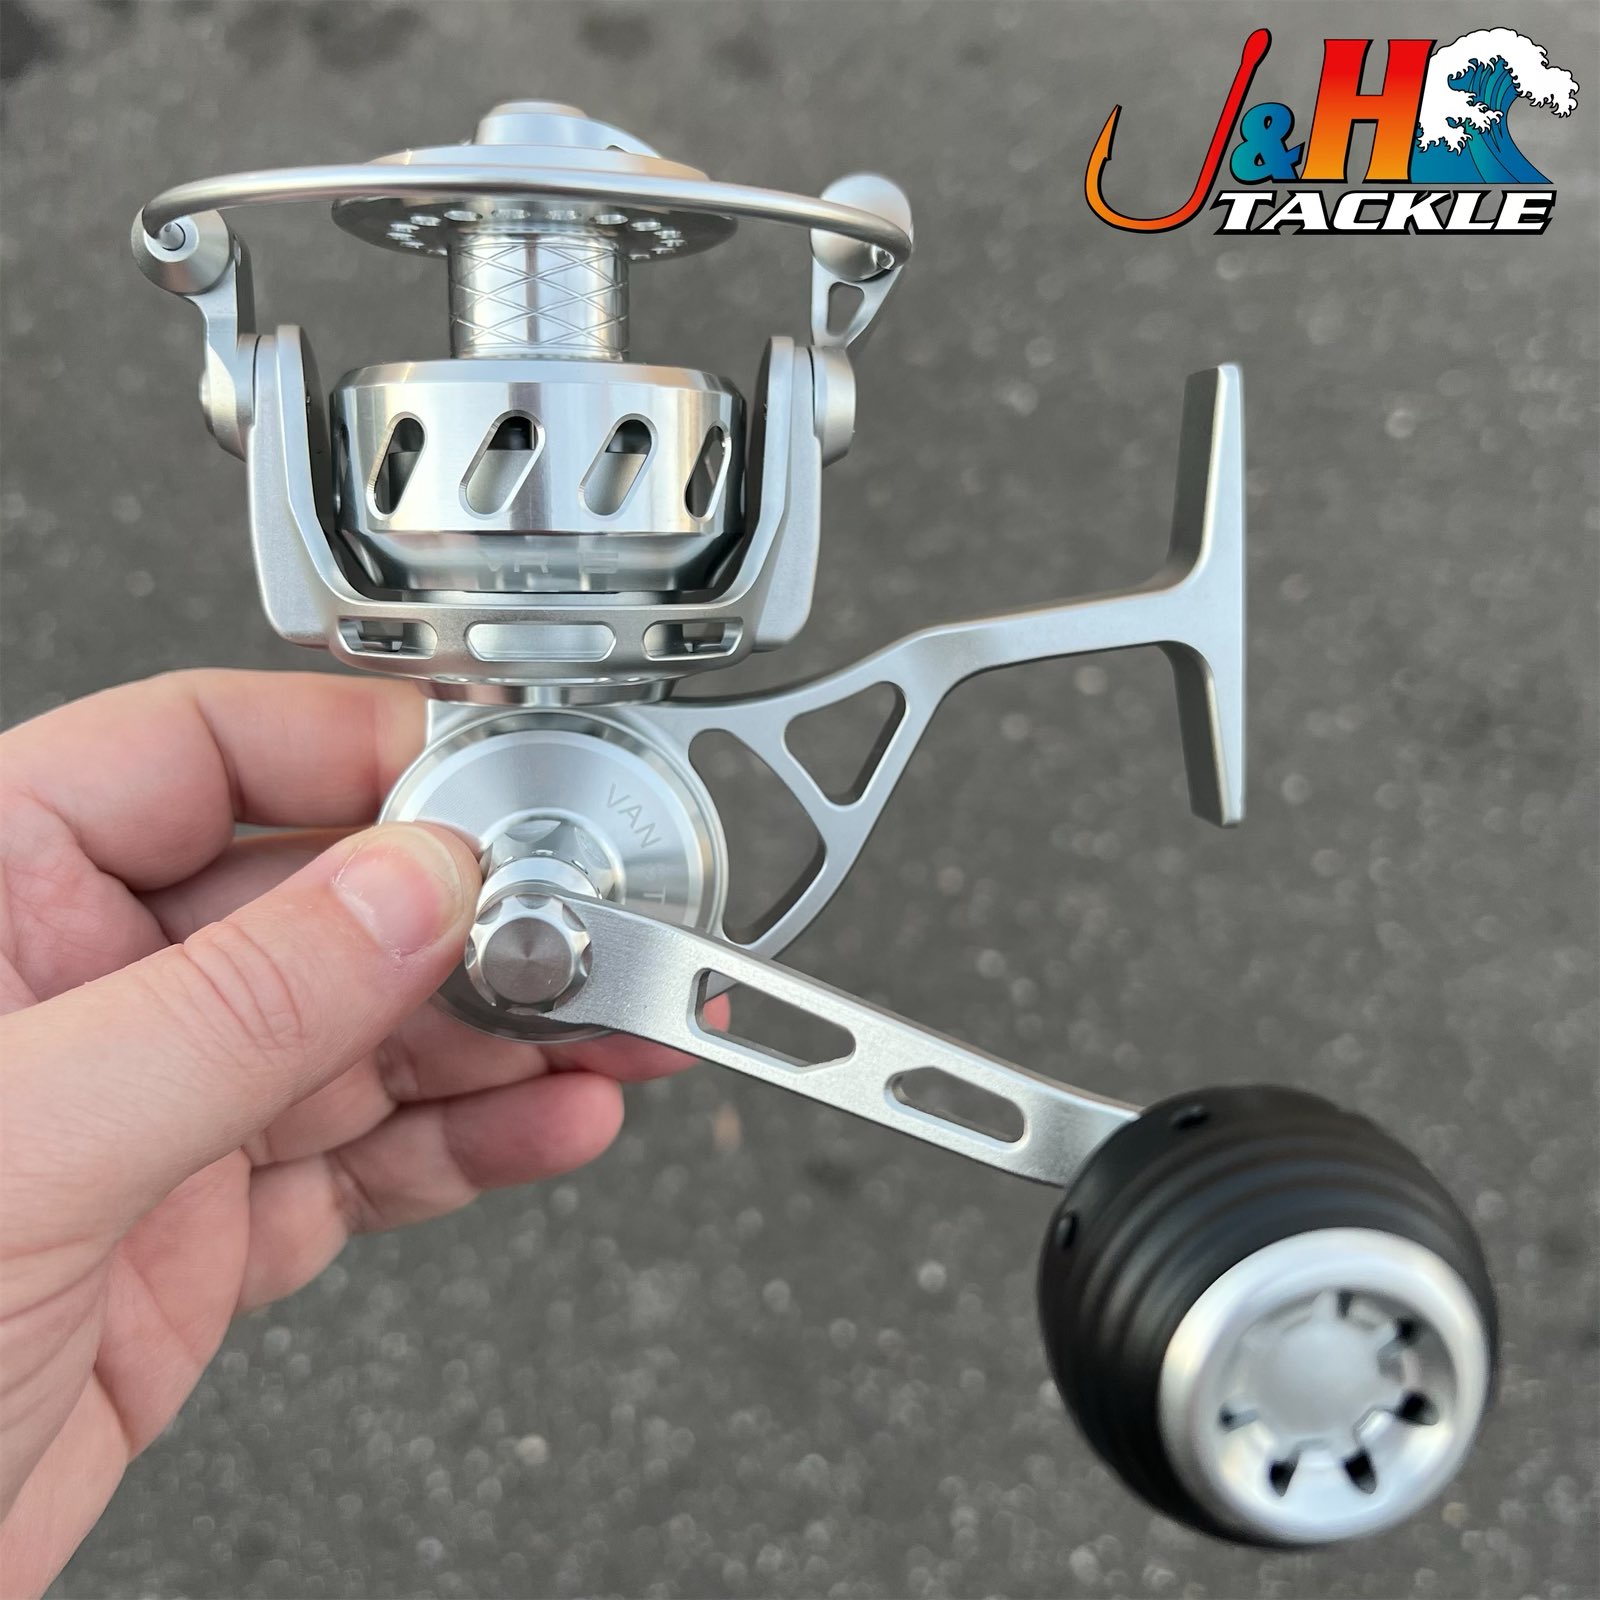 J&H Tackle on X: Silver Van Staal VR75 is hot! You should get one. You  deserve it!  #jandhtackle #fishing #vanstaal  #surfcasting #boatfishing Surfcasters Journal  / X